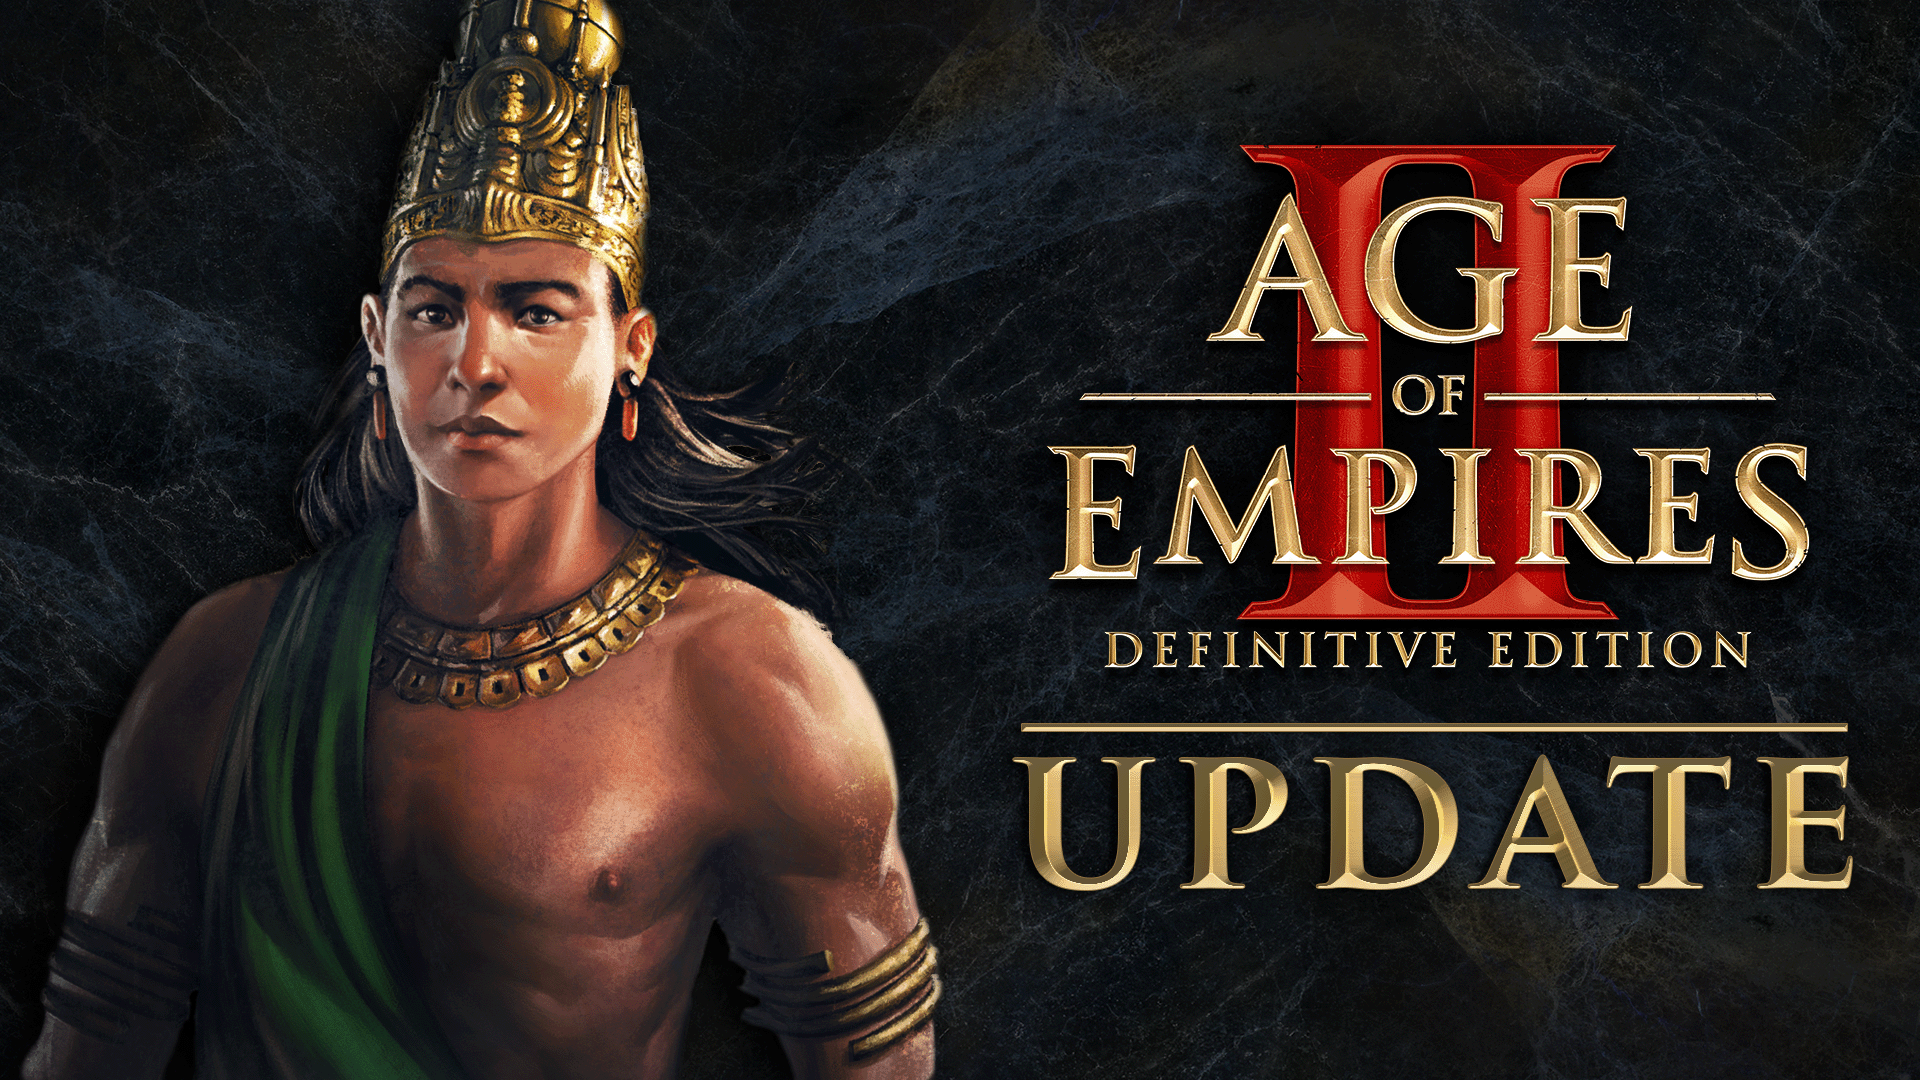 Age of Empires on Twitter: 